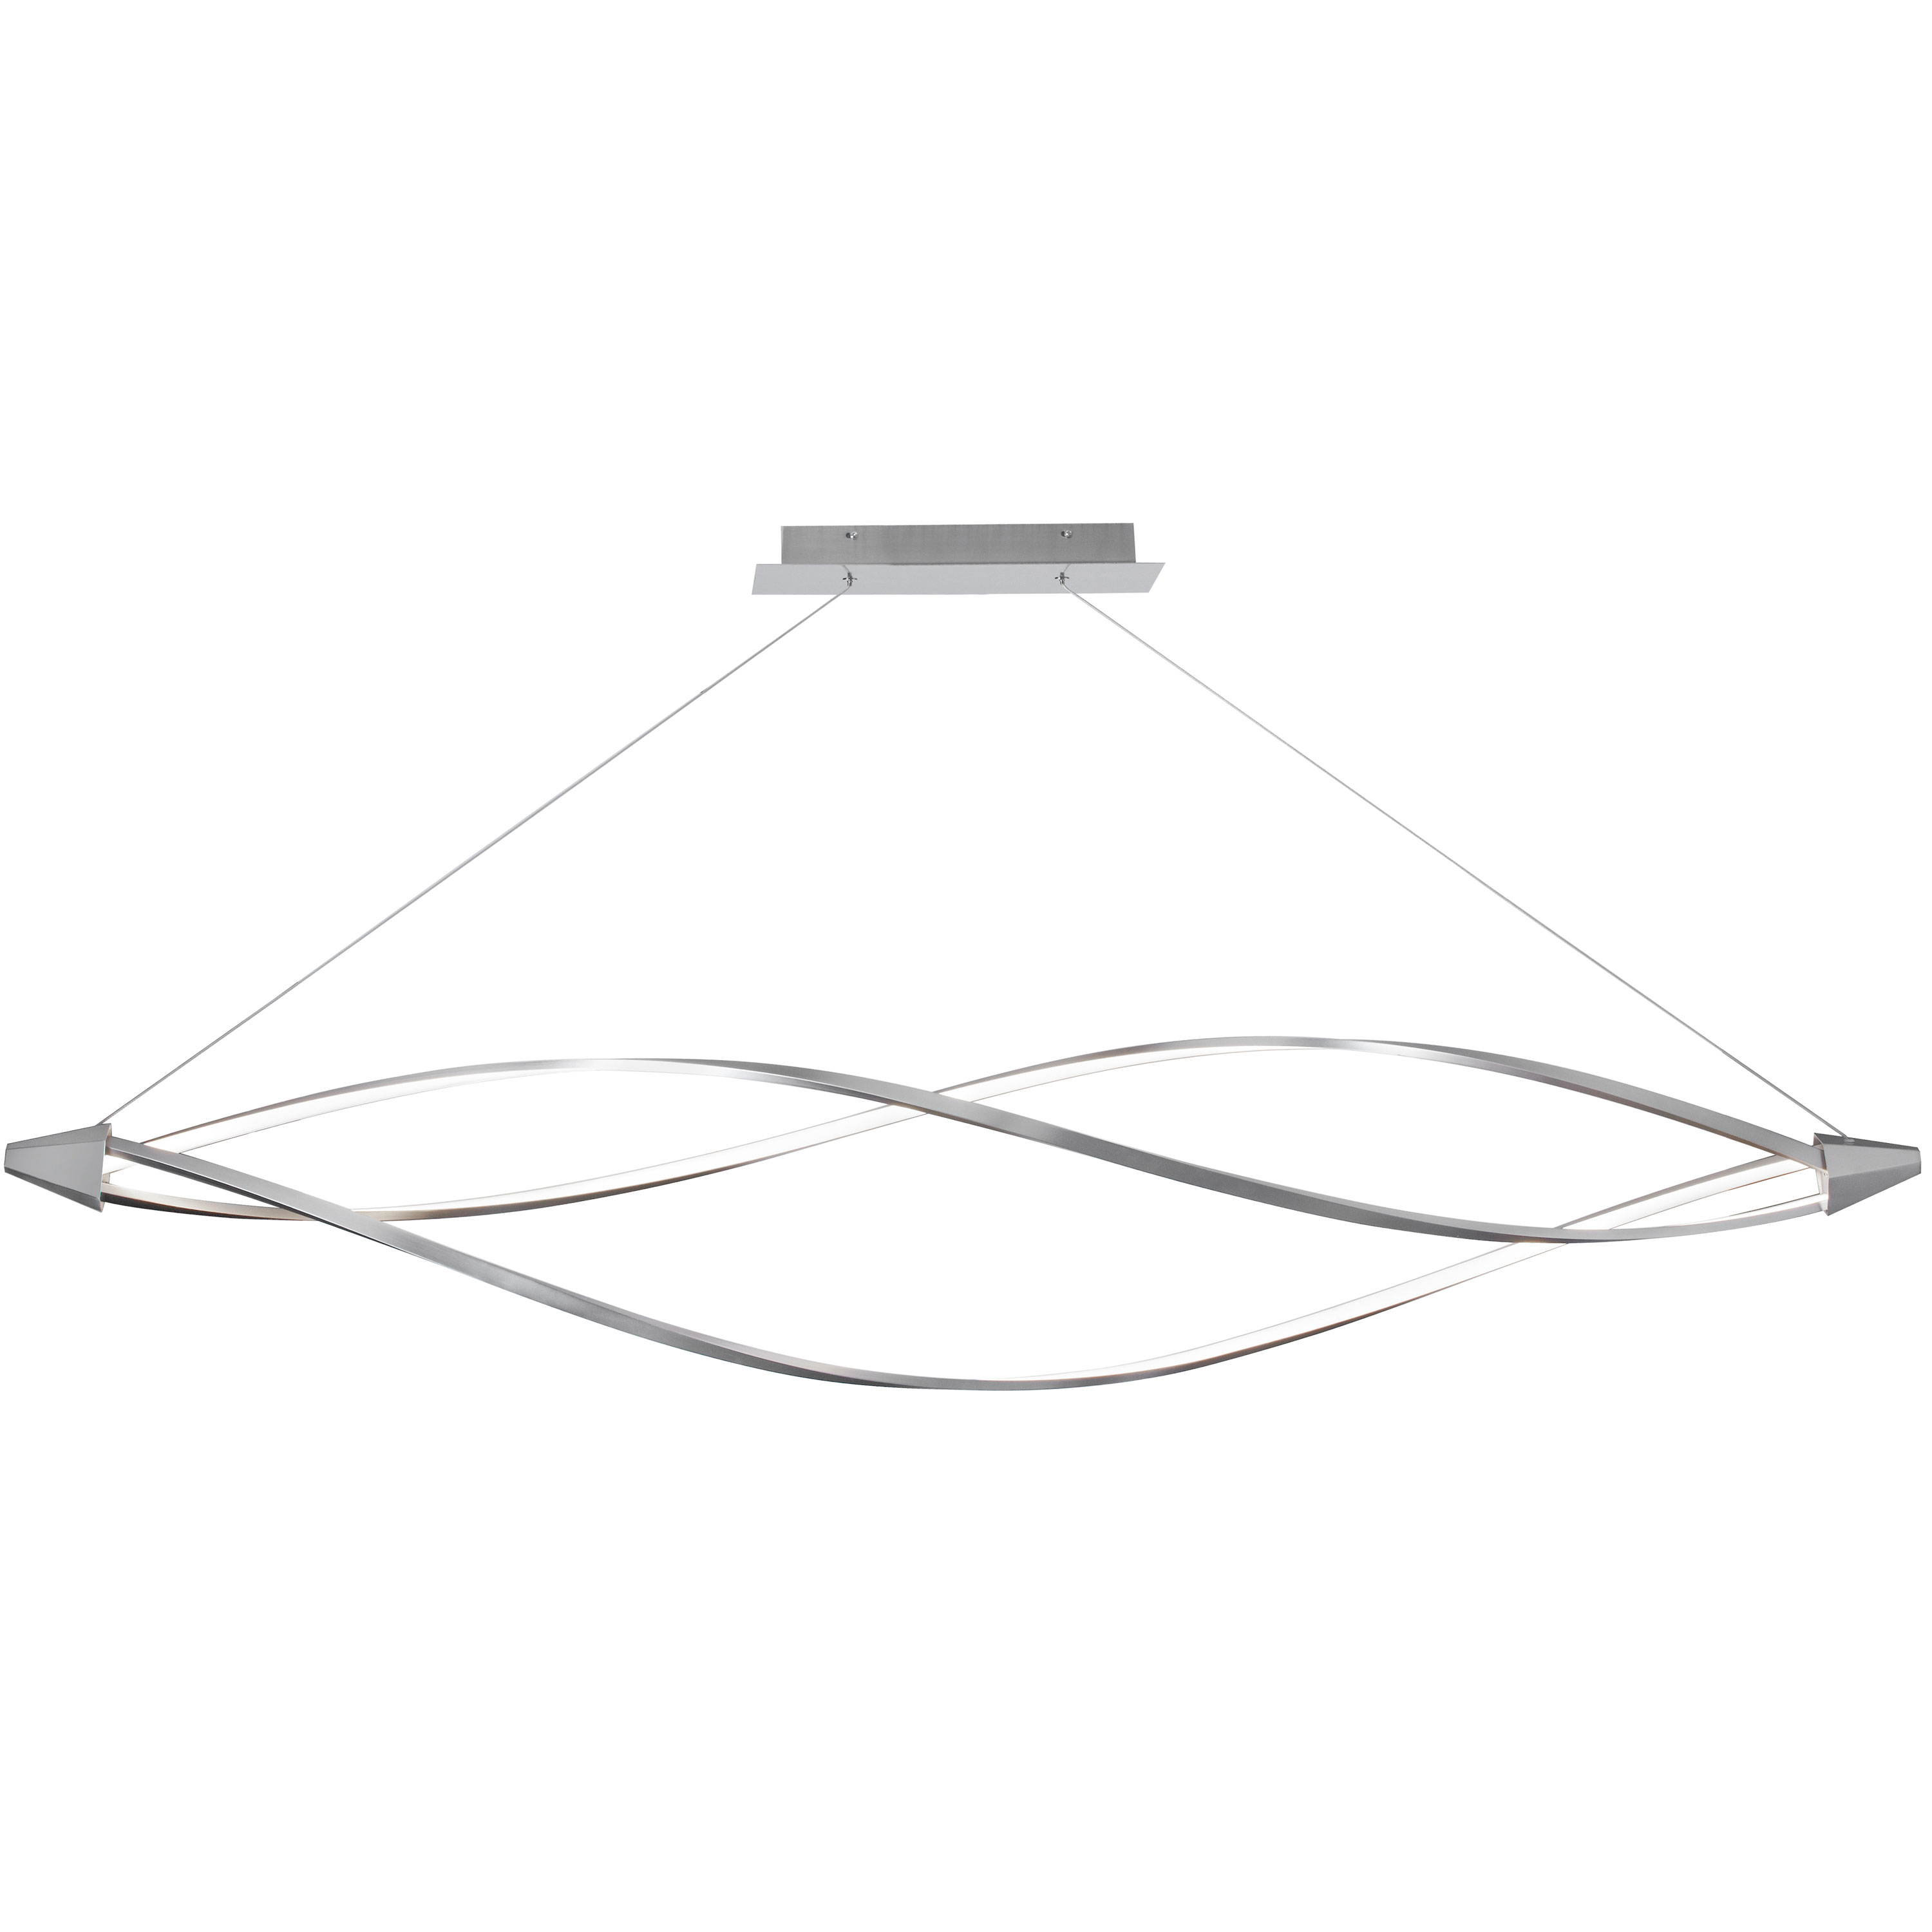 The Selene family of lighting is singularly elegant, characterized by an artistic curve of metal in either a horizontal or vertical format. The design features an integrated LED light. LED fixtures produce light at up to 90 percent better efficiency than incandescent lighting. The metal frame is artfully curved in a lyrical and symmetrical motif, using stainless steel for the horizontal configuration, and aluminum with a polished chrome finish for one of the vertical configurations. A vertical format with black matte finish includes a white acrylic diffuser for a subtler glow. With its artistic appeal, Selene lighting adds a note of luxury in your contemporary kitchen or dining room.